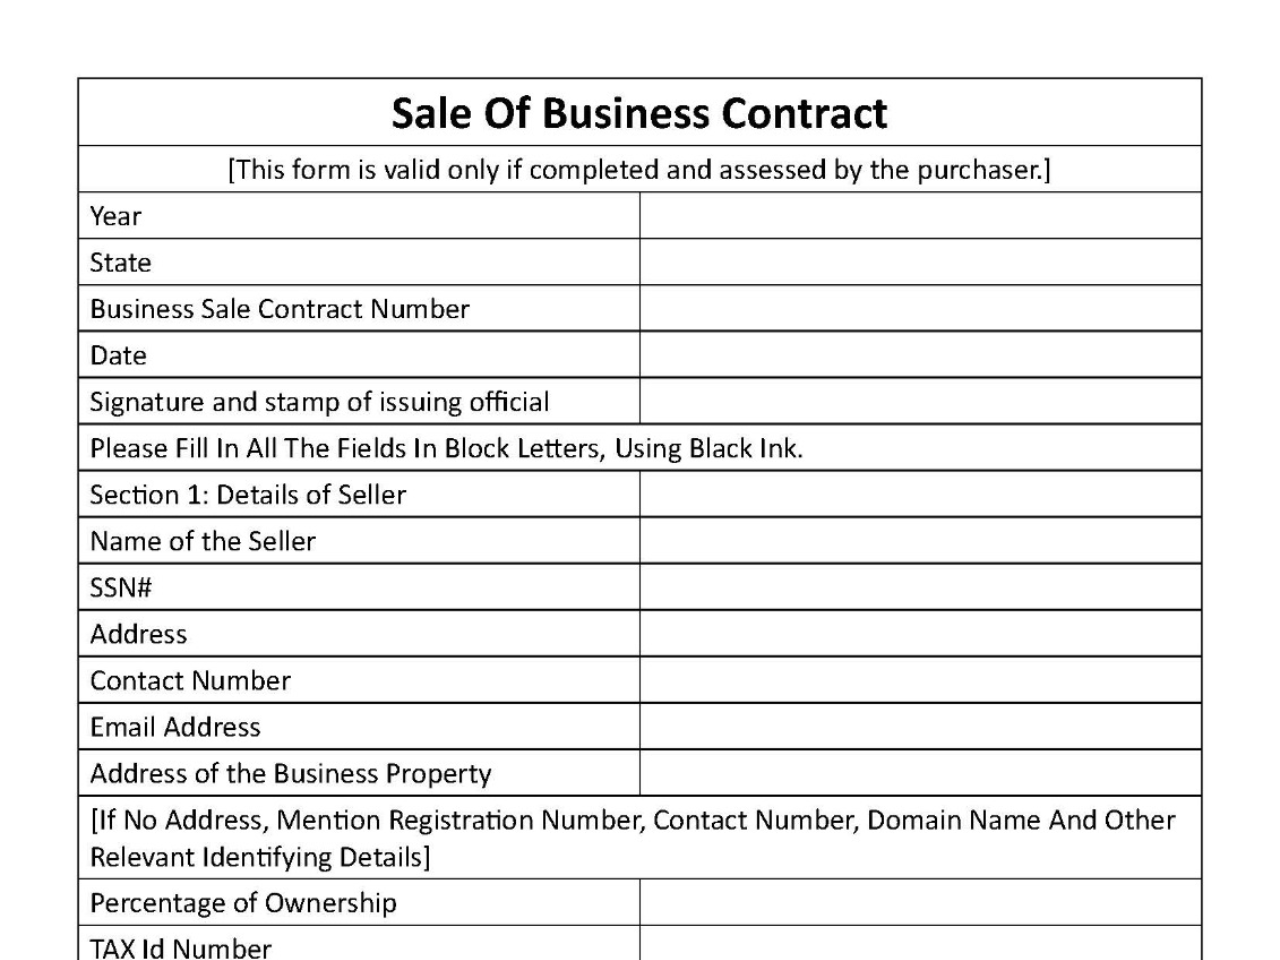 Business Sale Contract Fillable PDF Template